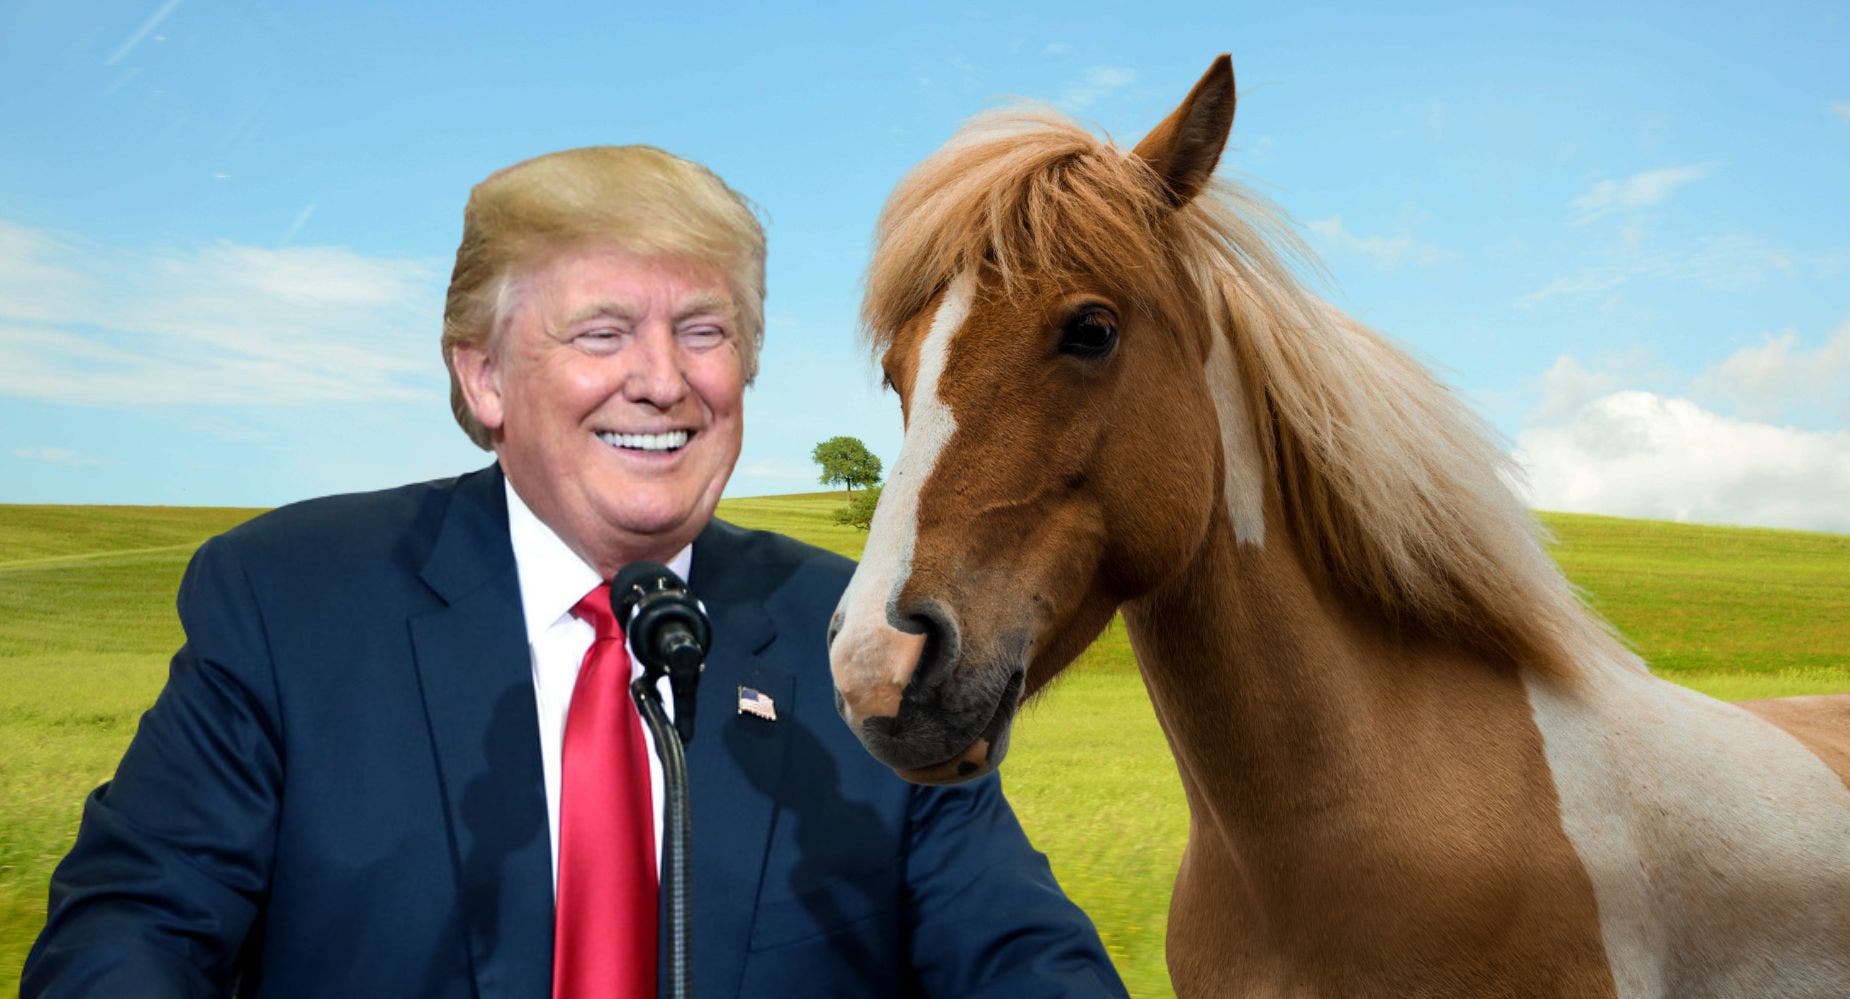 Trump Once Tried To Foot His $2M Legal Bill By Offering A $5M Horse, New Book Reveals